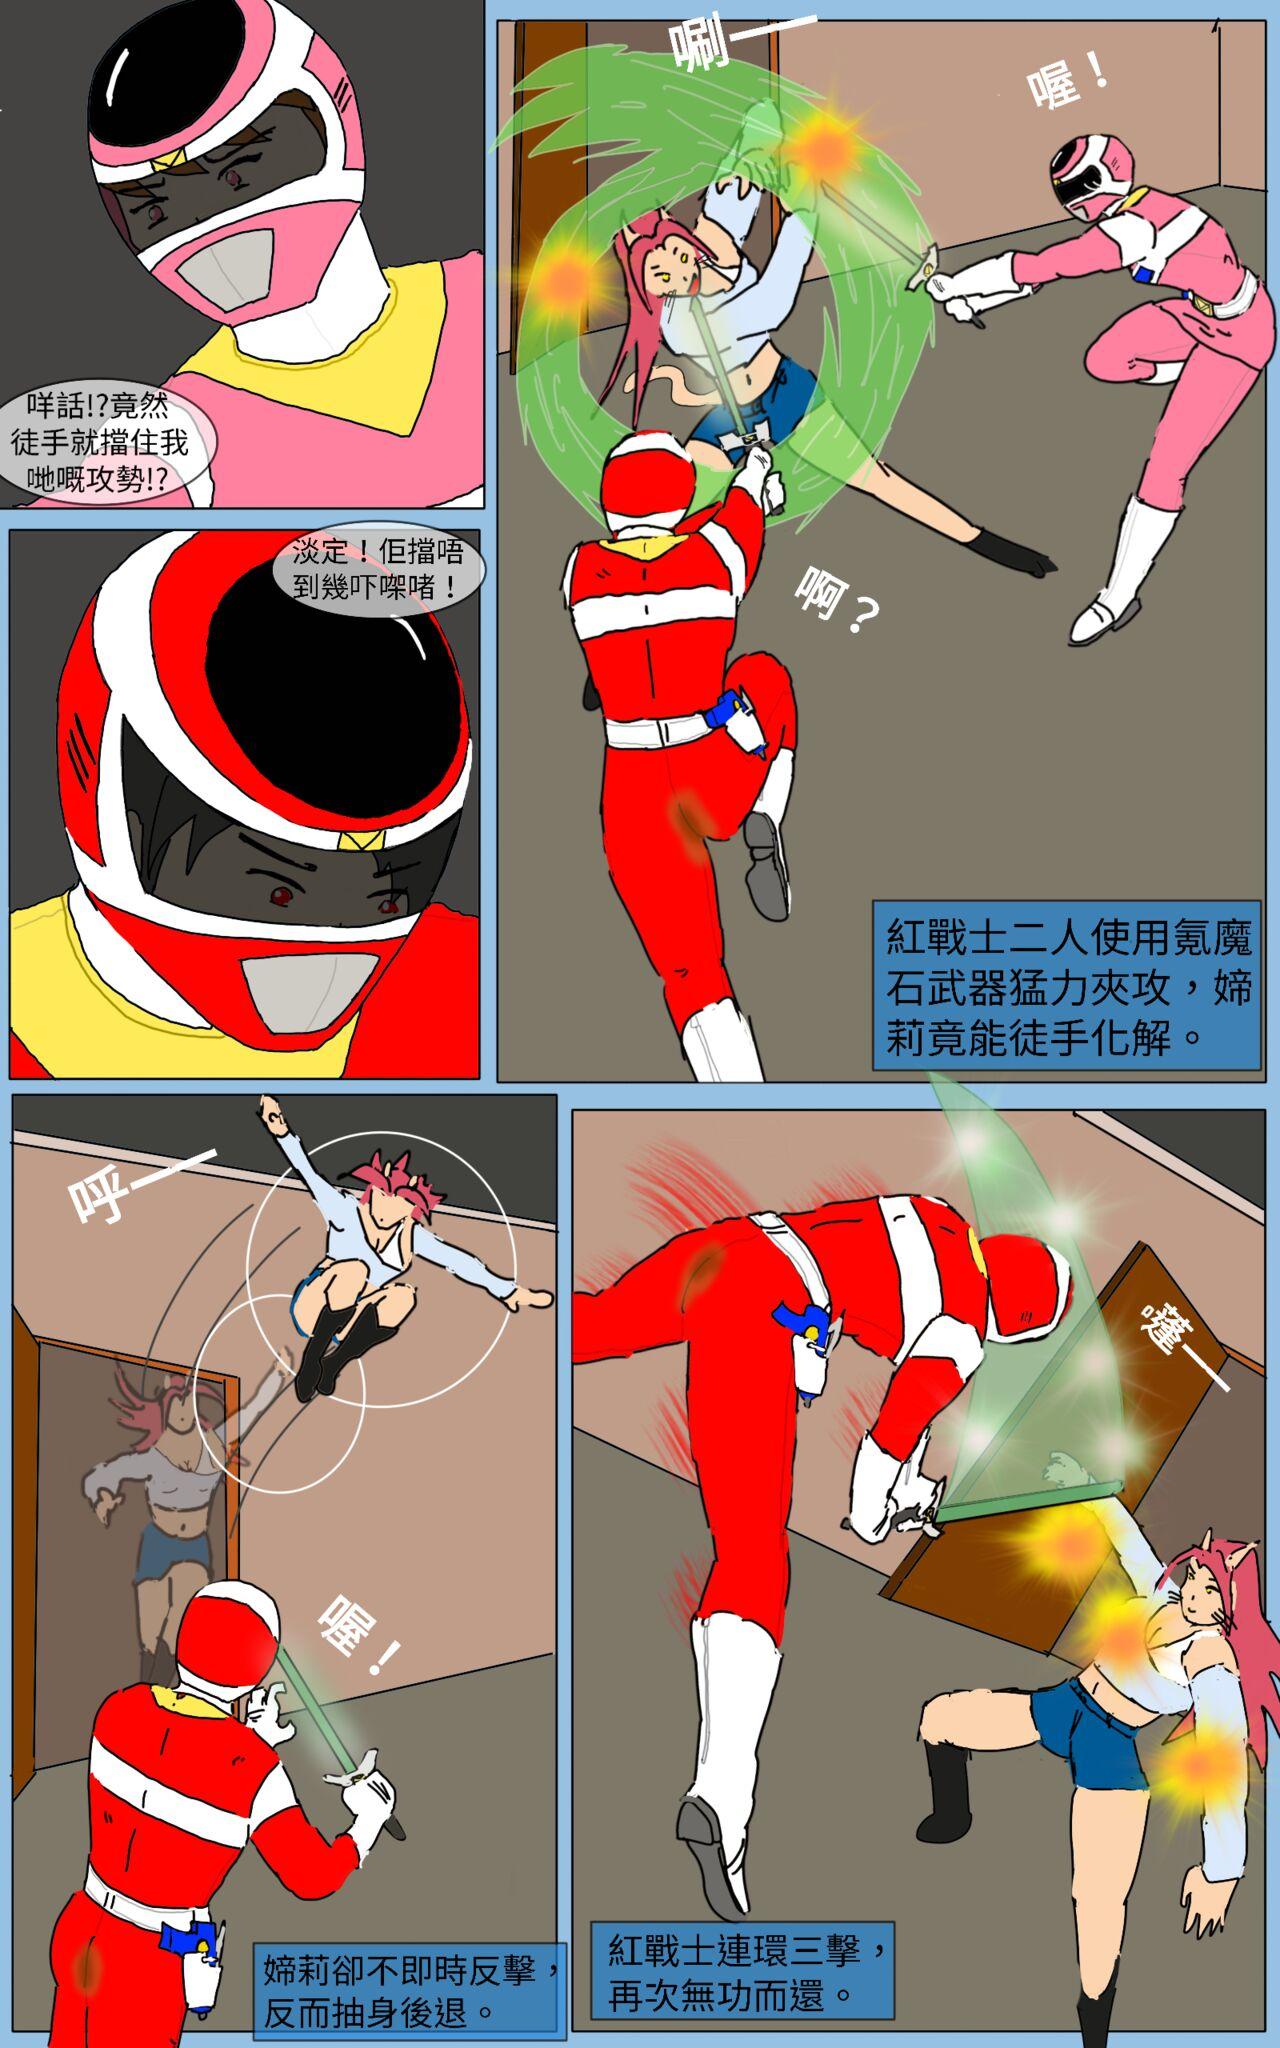 Real Orgasms Mission 15 - Super sentai Amateurs Gone Wild - Page 12